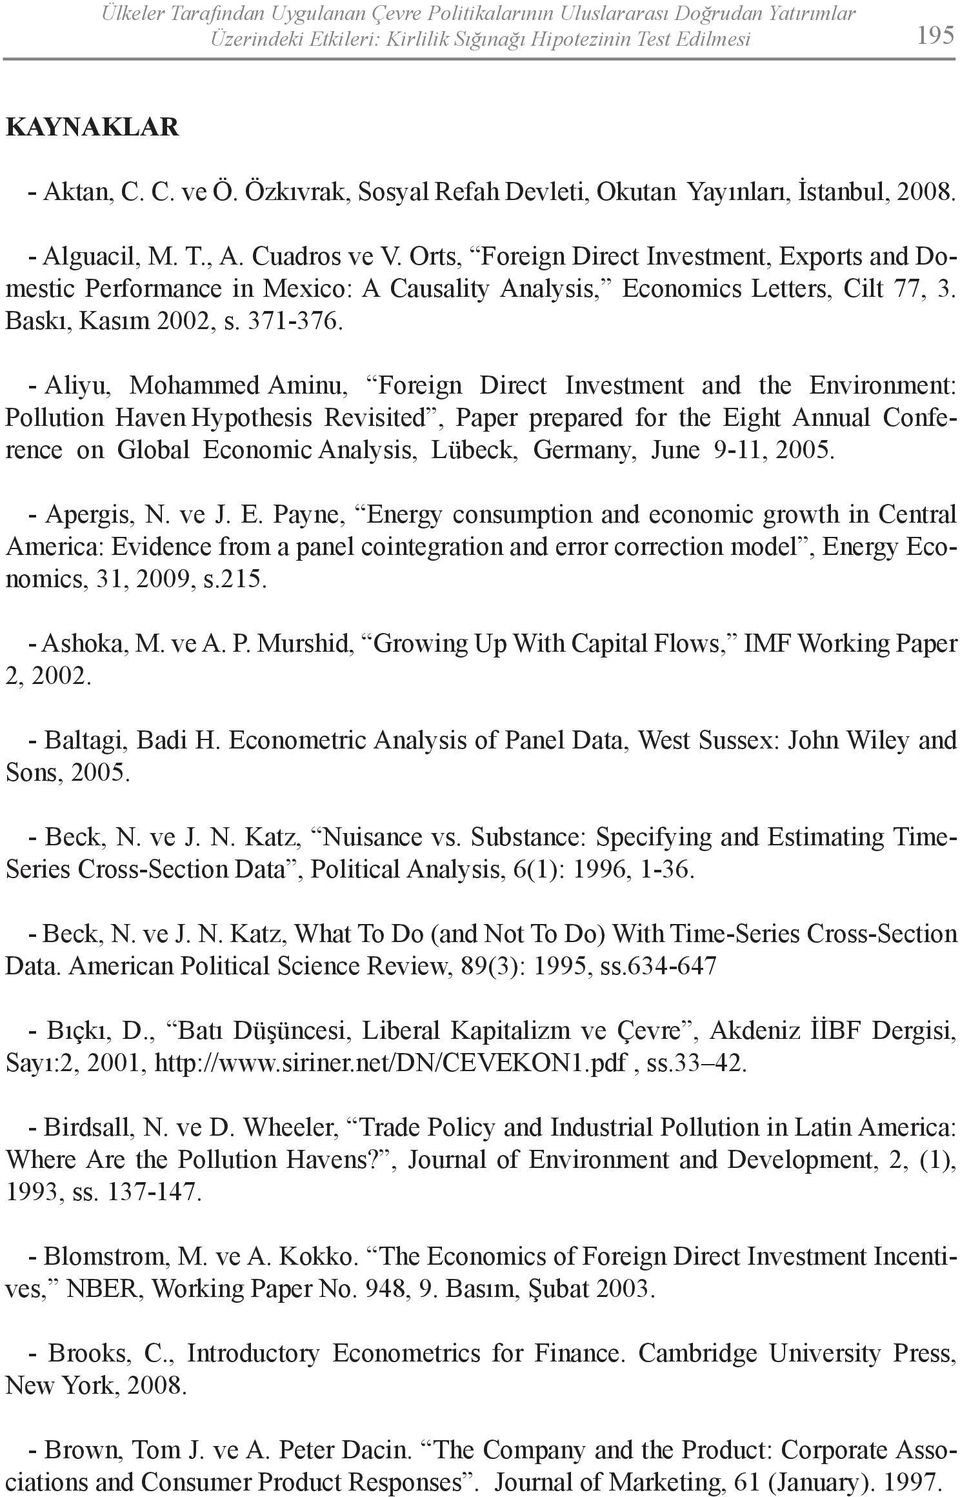 Orts, Foreign Direct Investment, Exports and Domestic Performance in Mexico: A Causality Analysis, Economics Letters, Cilt 77, 3. Baskı, Kasım 2002, s. 371-376.